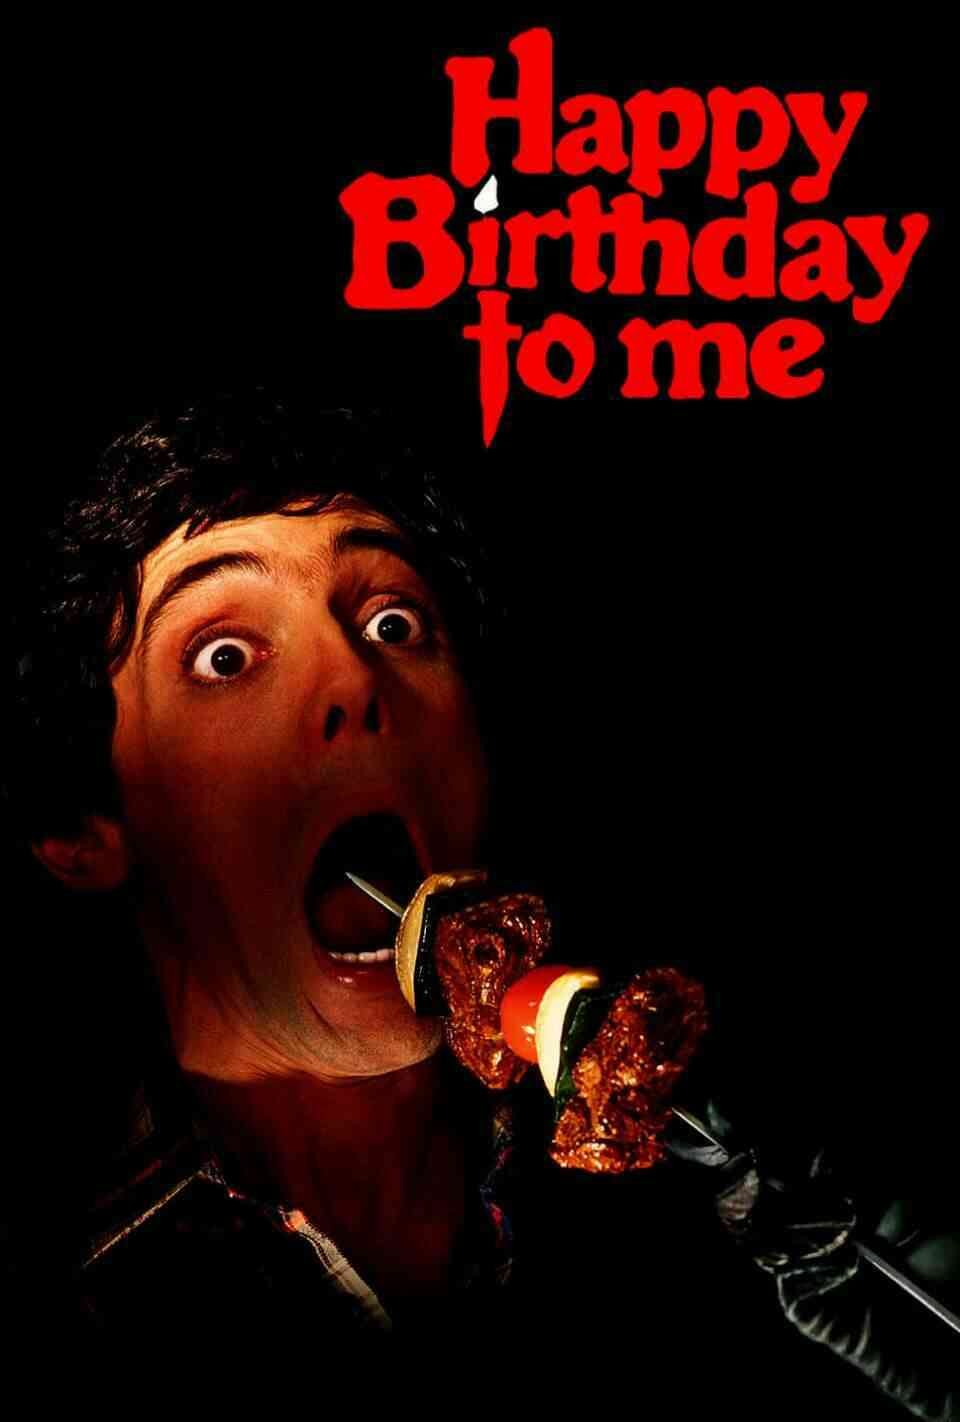 Read Happy Birthday to Me screenplay (poster)